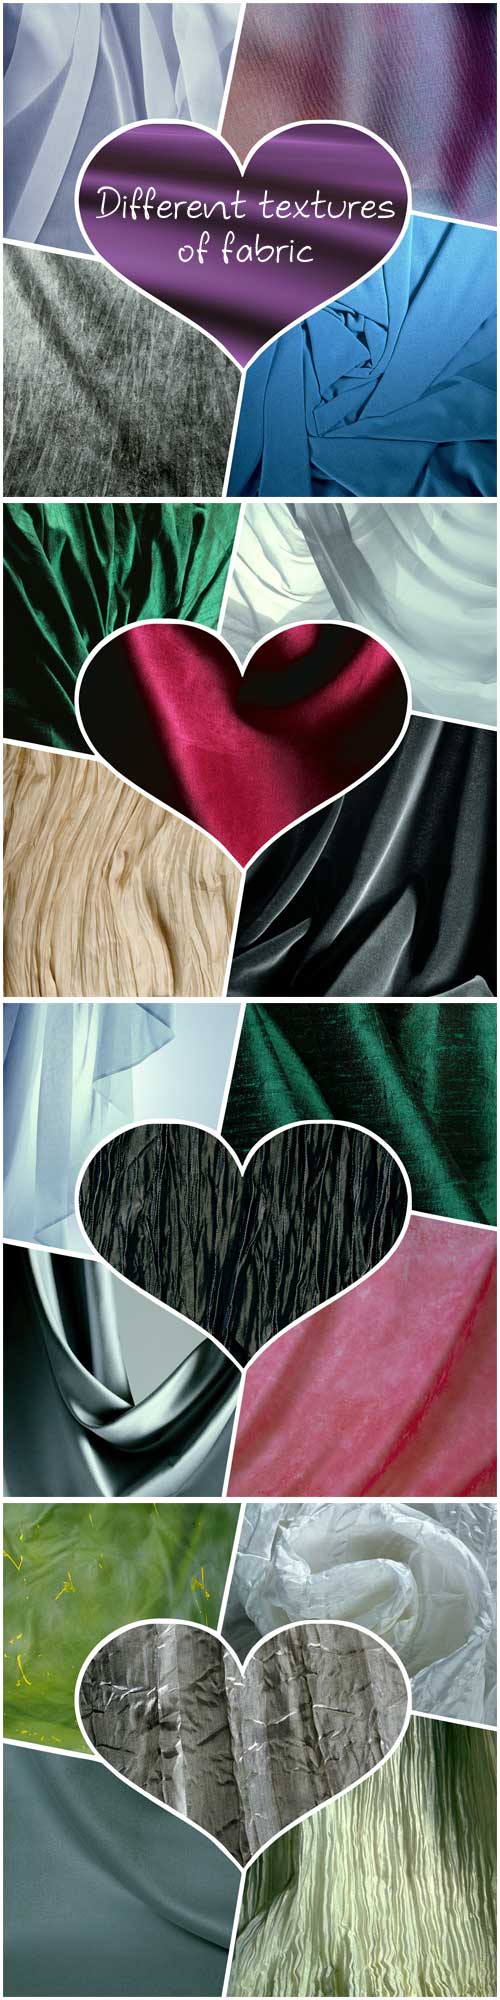 Different textures of fabric